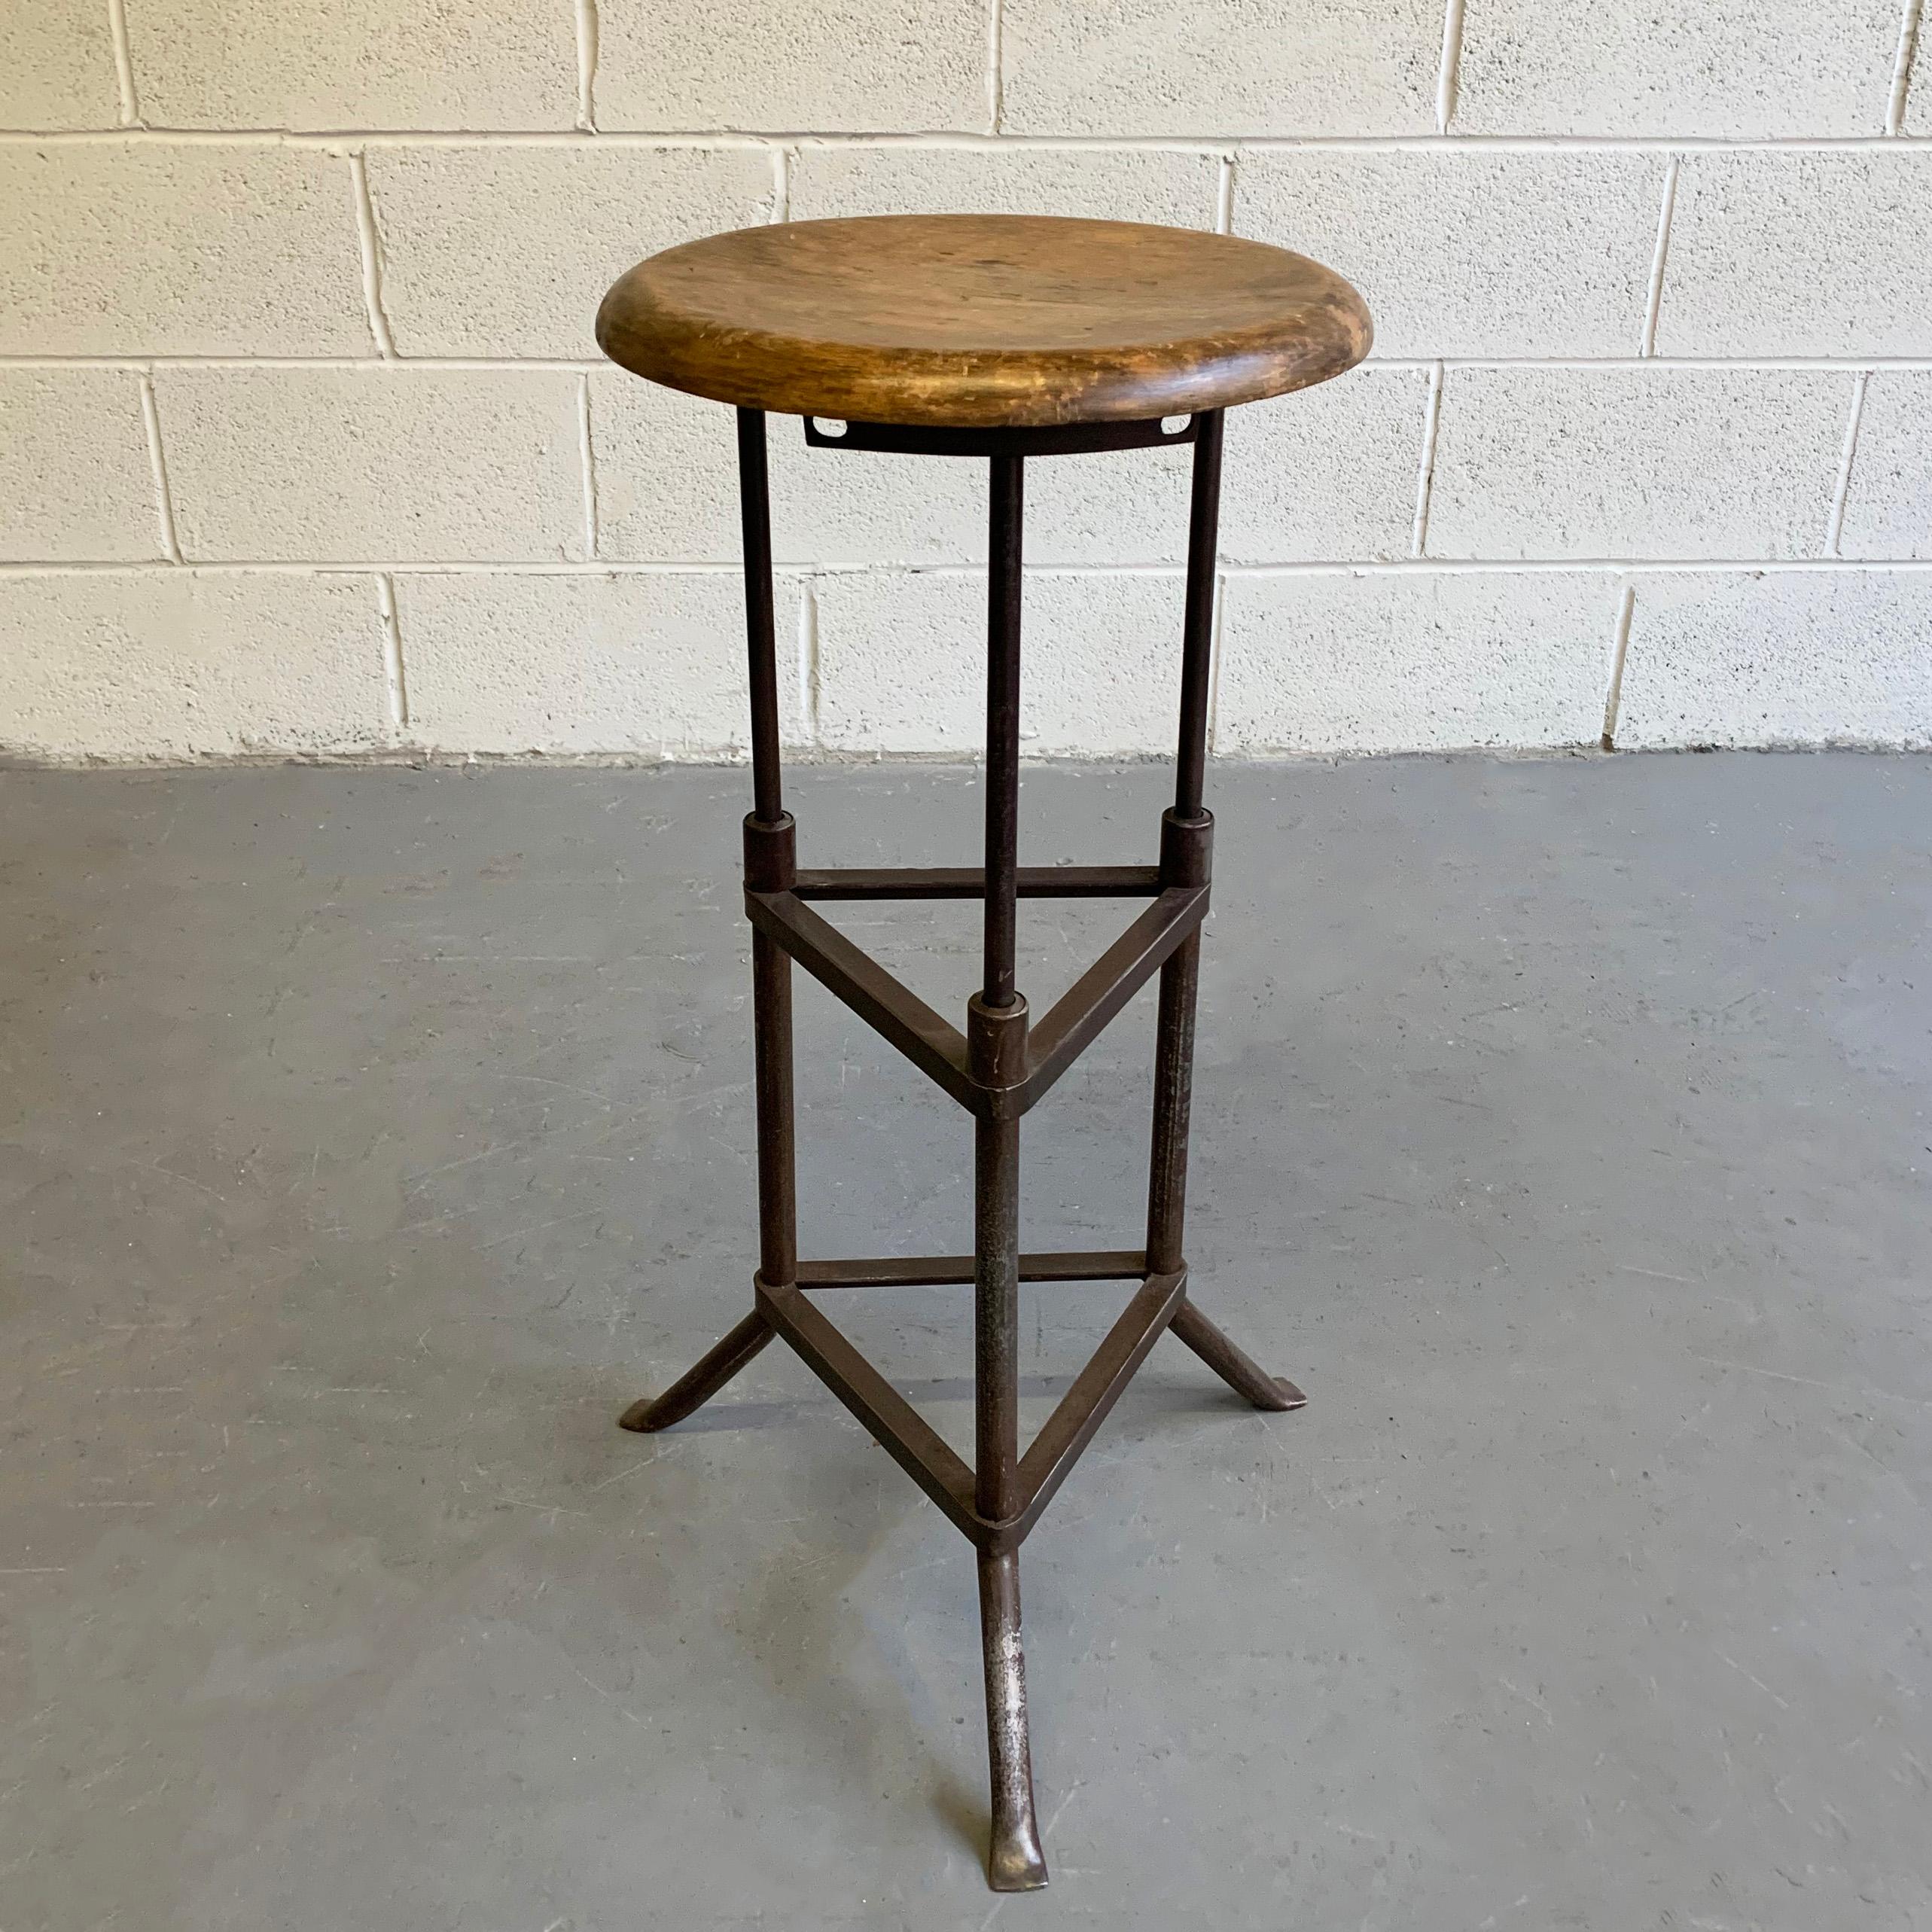 Industrial, early 20th century, drafting stool features s tripod, brushed steel base with 14 inch diameter, maple seat.